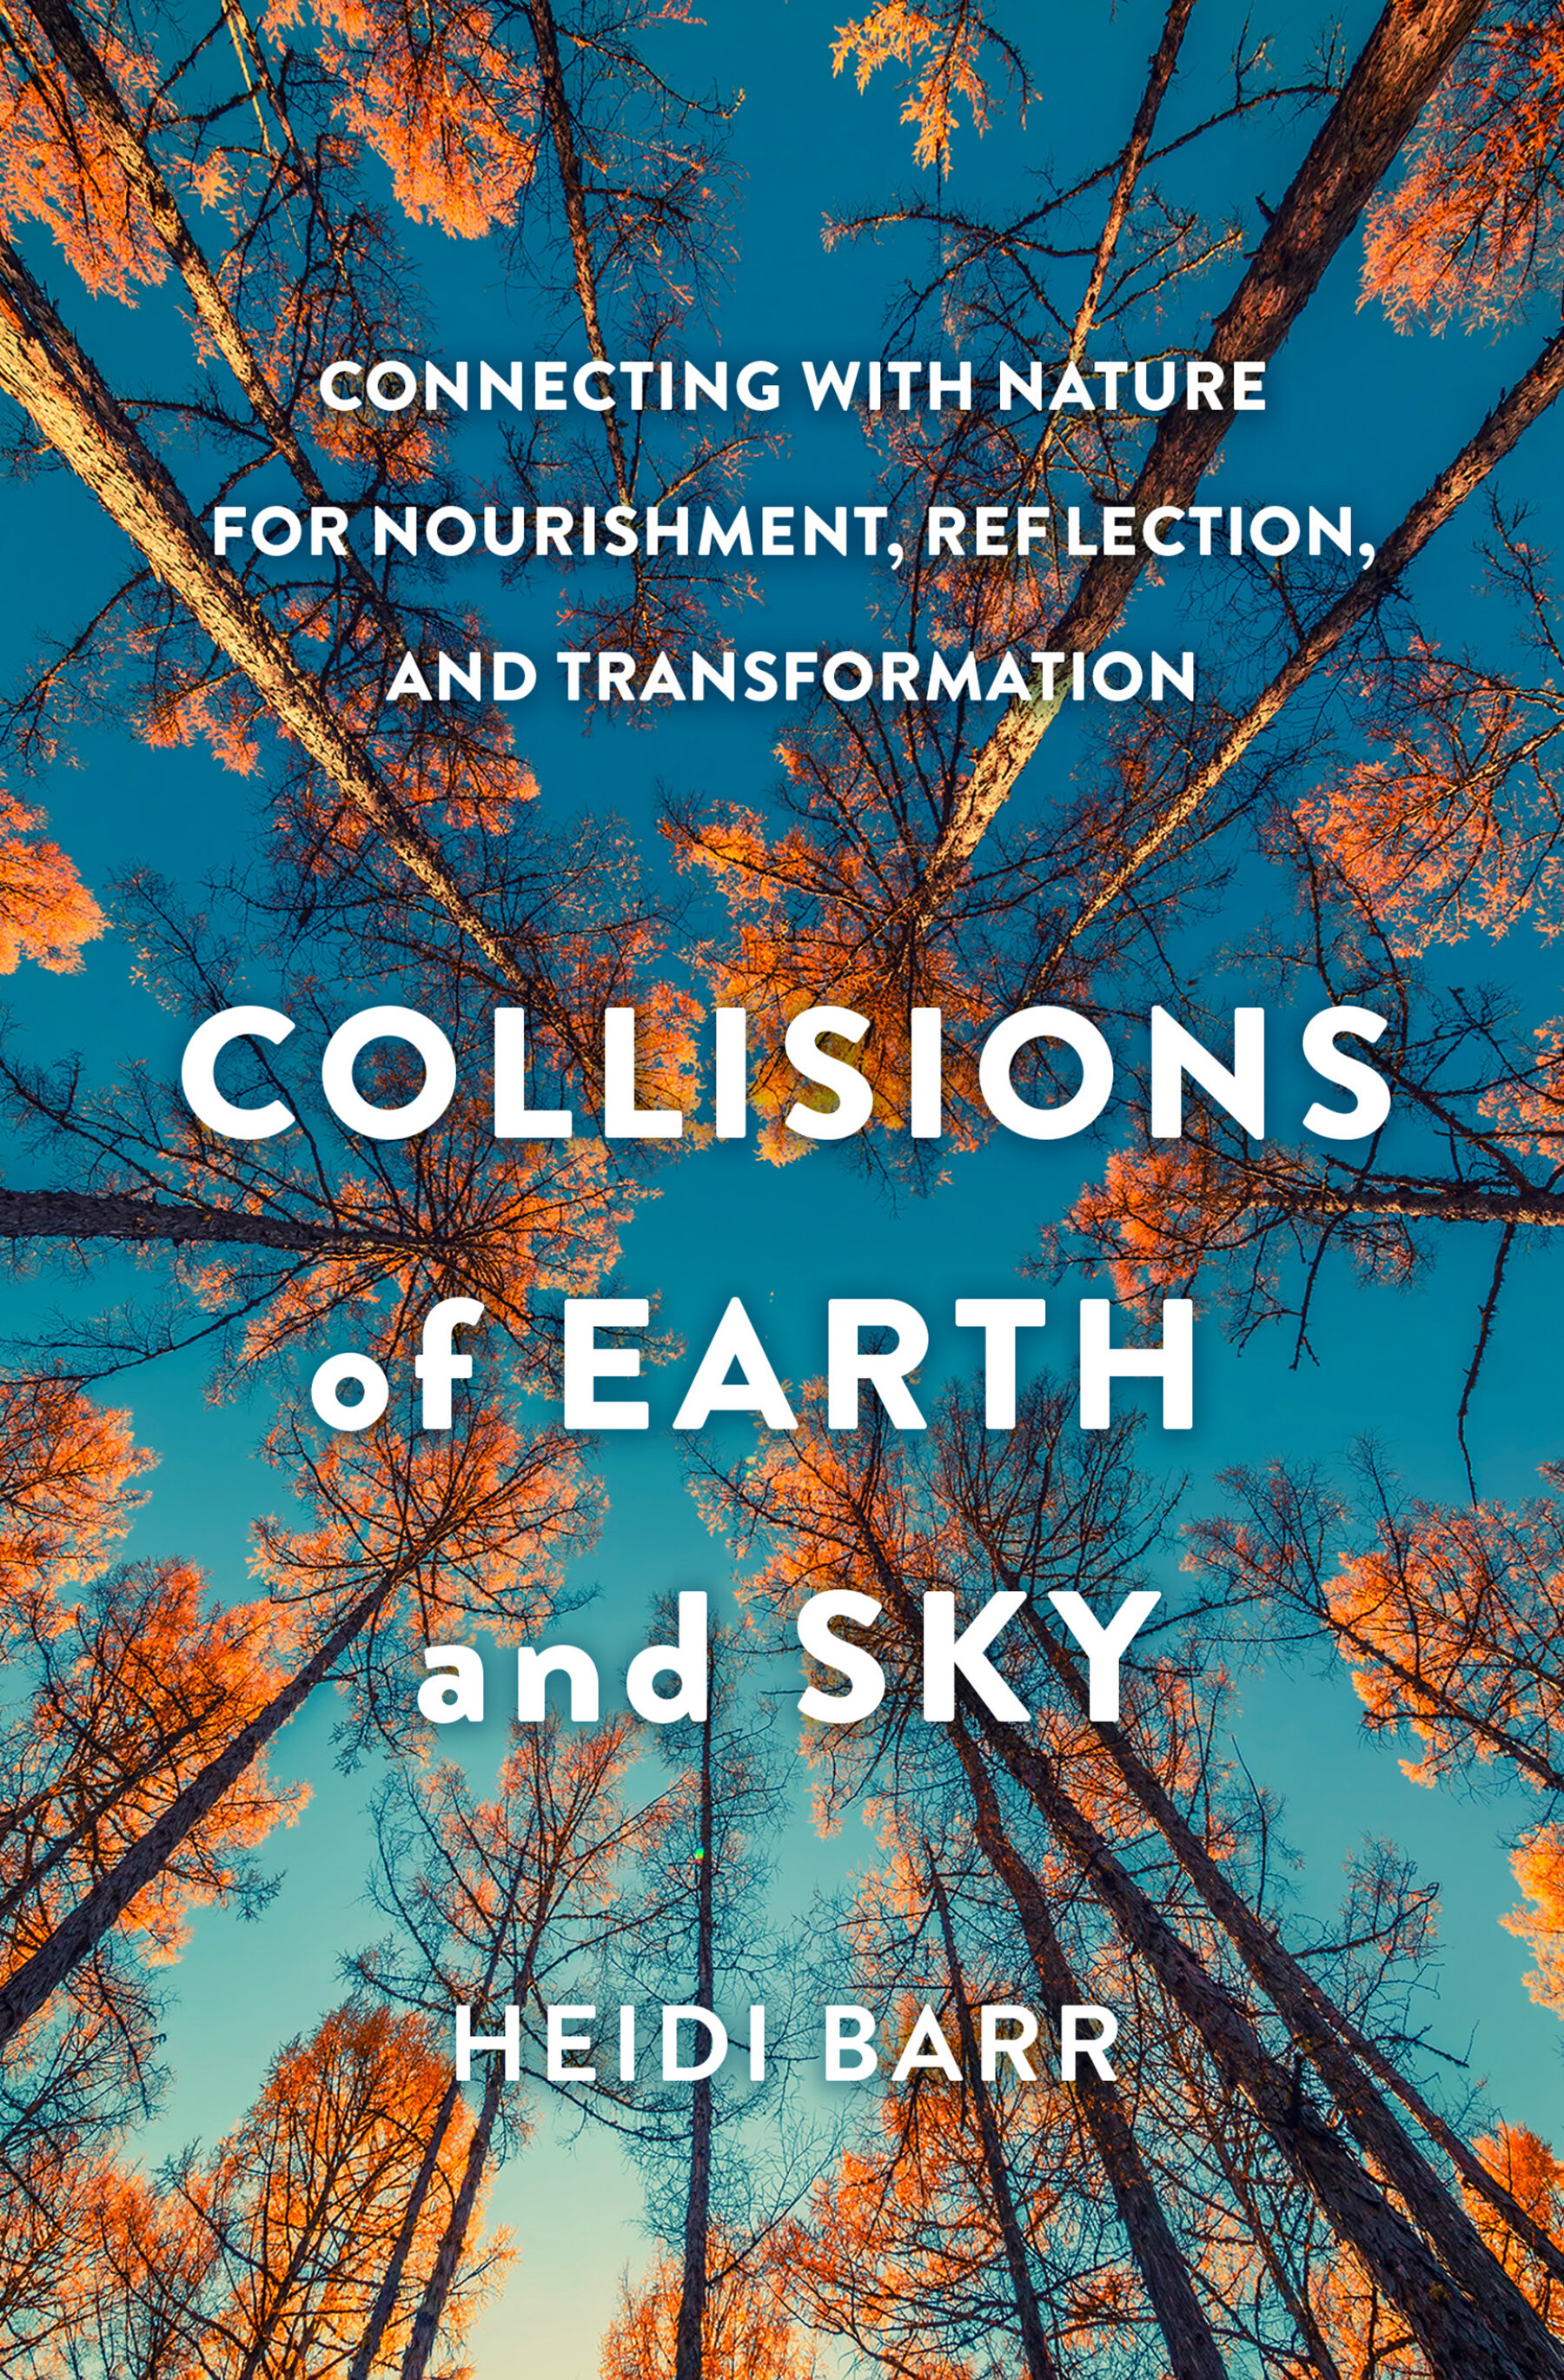 Collisions of Earth and Sky: Connecting with Nature for Nourishment, Reflection, and Transformation